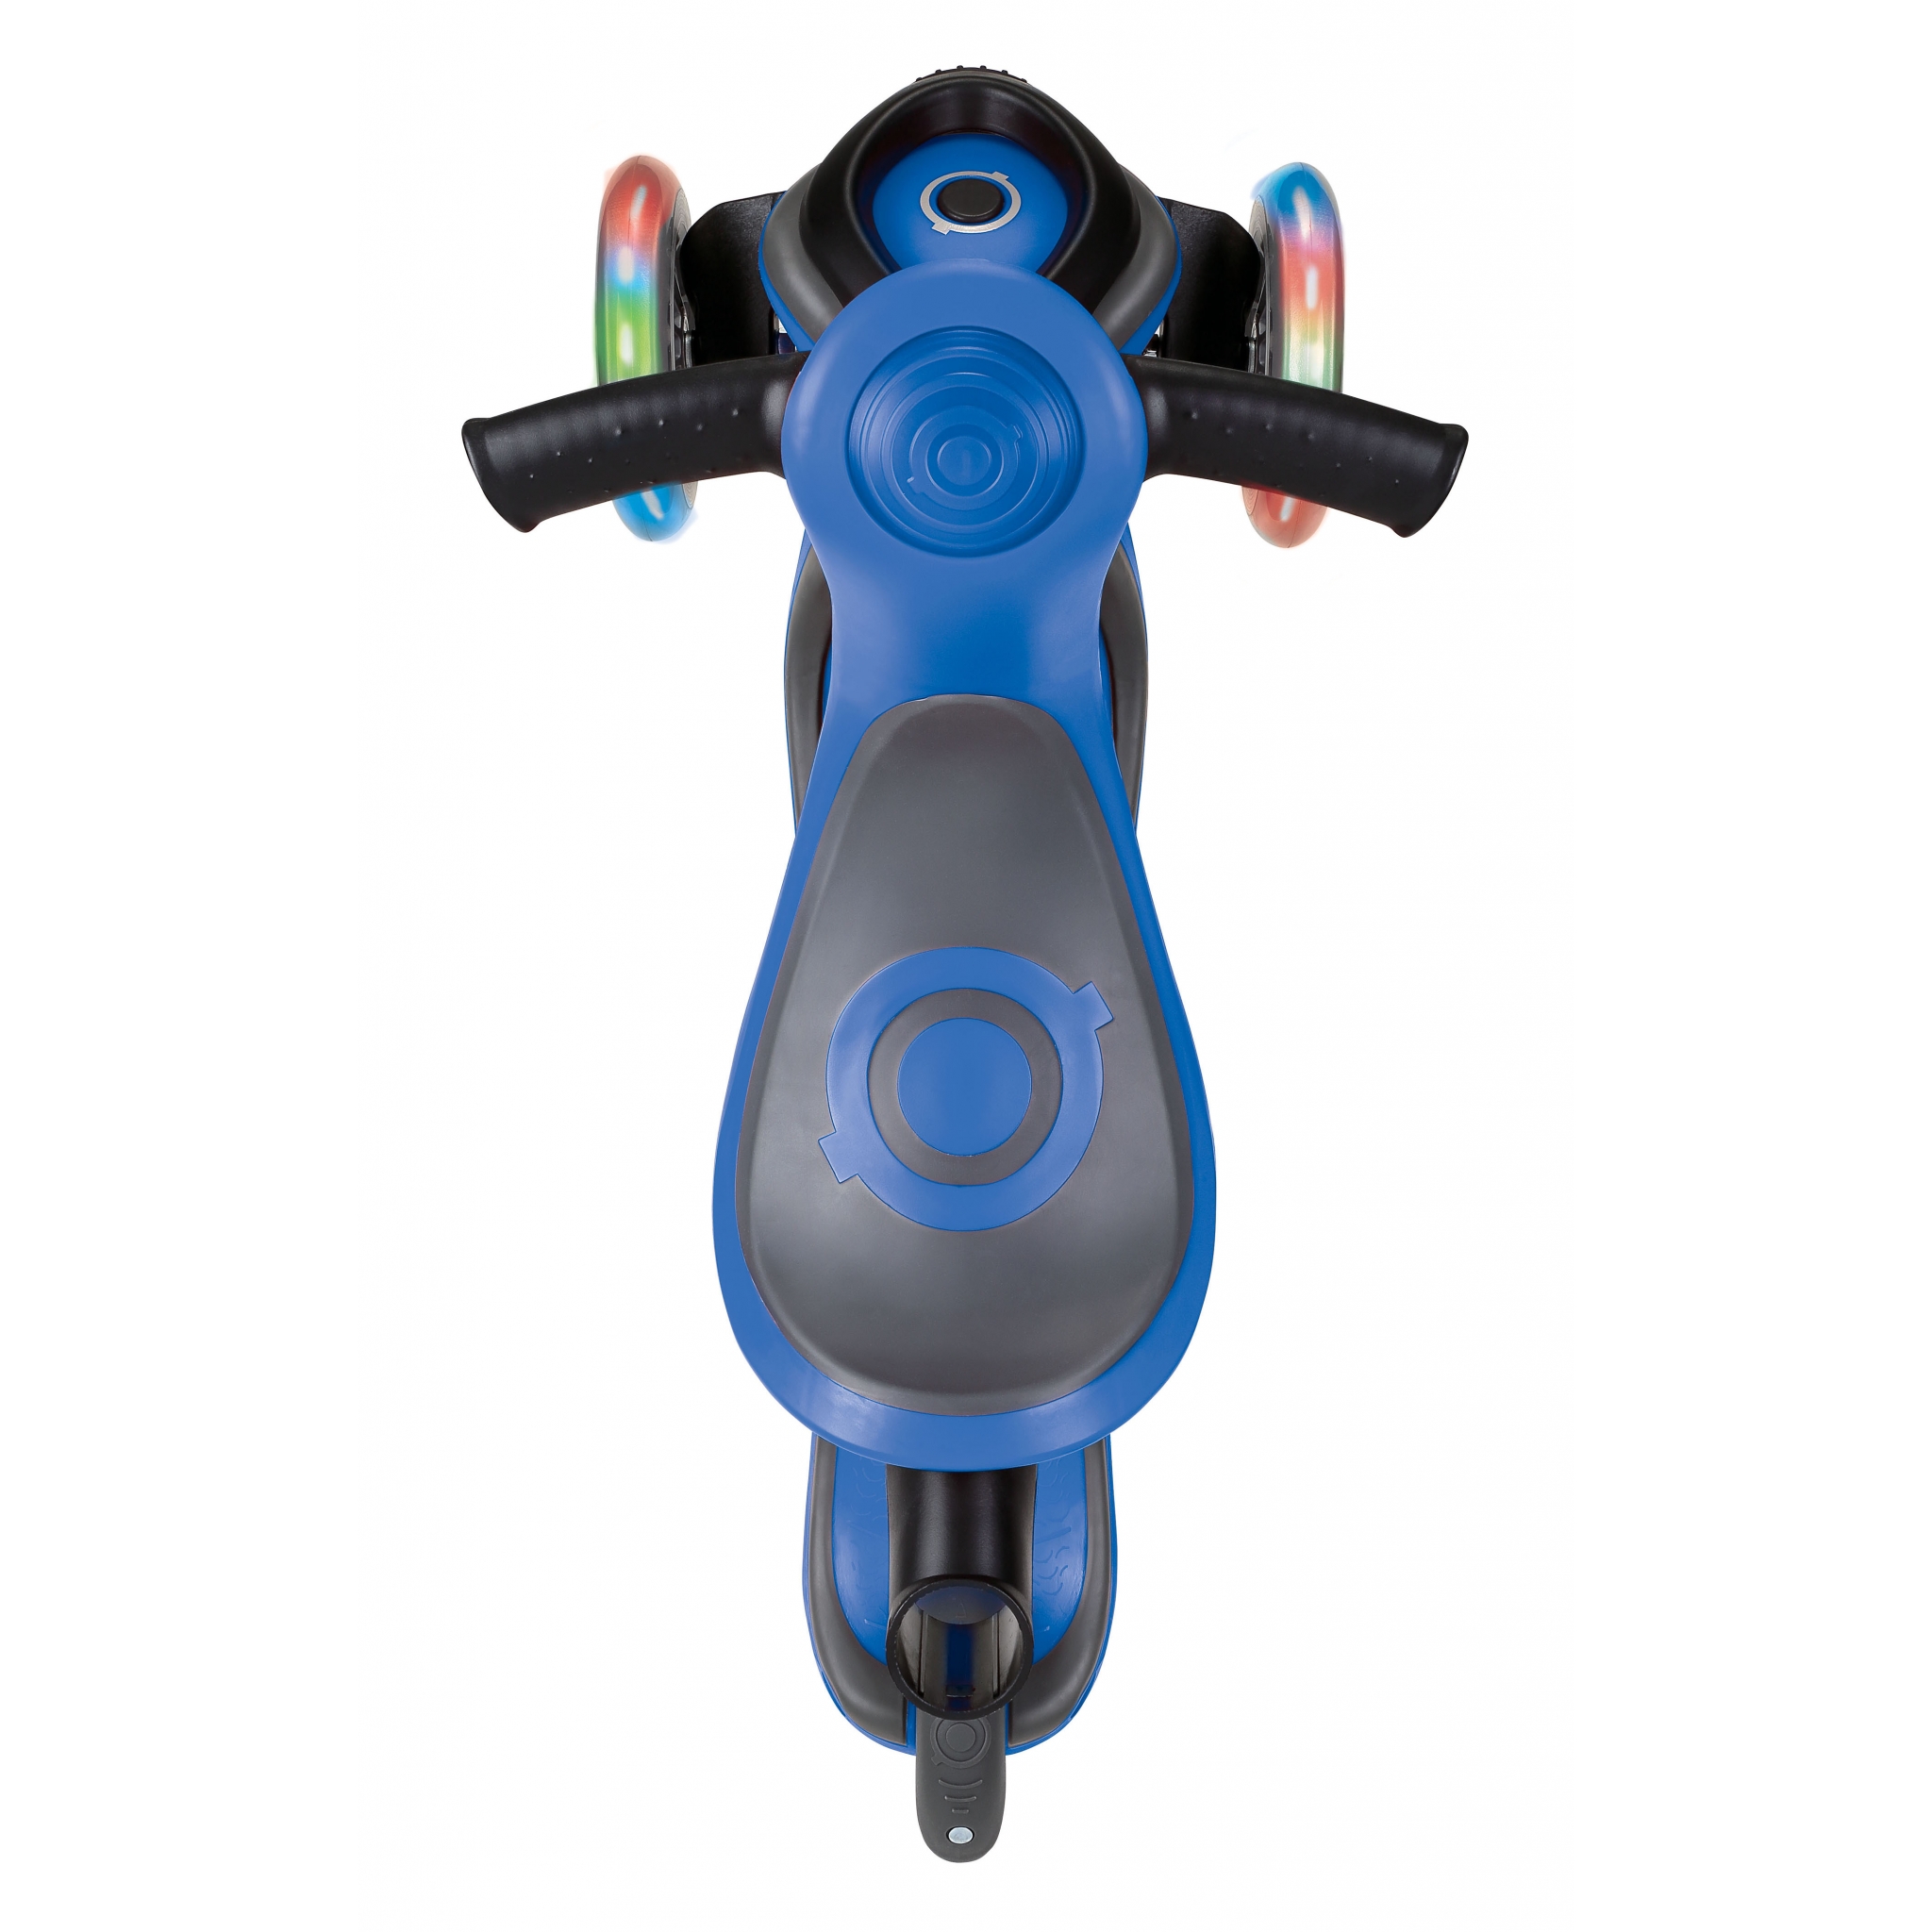 GO-UP-COMFORT-LIGHTS-scooter-with-seat-extra-wide-seat-for-maximum-comfort-navy-blue 3